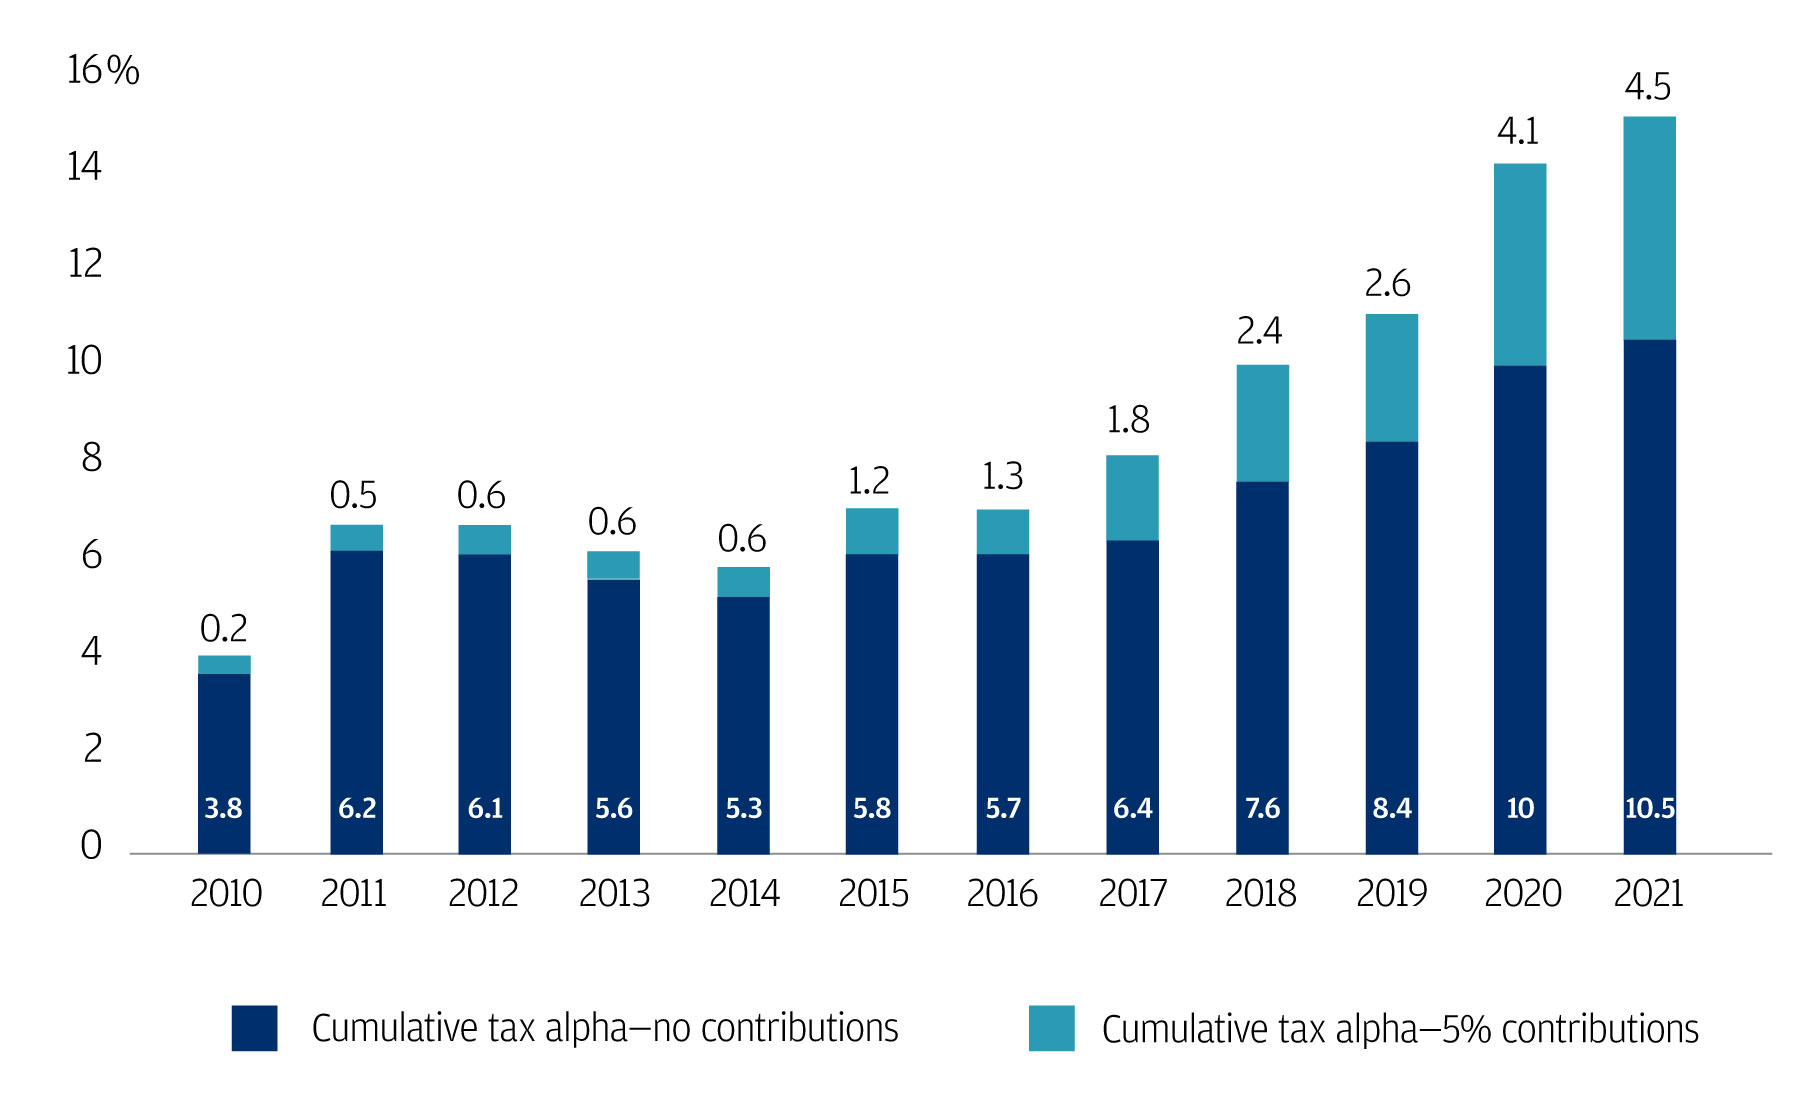 Bar chart representing the tax alpha experience of two portfolios, Portfolio A (blue bar) and Portfolio B (purple bar). It illustrates the difference in tax alpha between contributing 5% of the portfolio in cash annually over a period of 12 years (Portfolio B), compared to no cash contributions at all (Portfolio A). During this time, Portfolio B had an additional cumulative tax alpha of 4.5% compared to Portfolio A. 